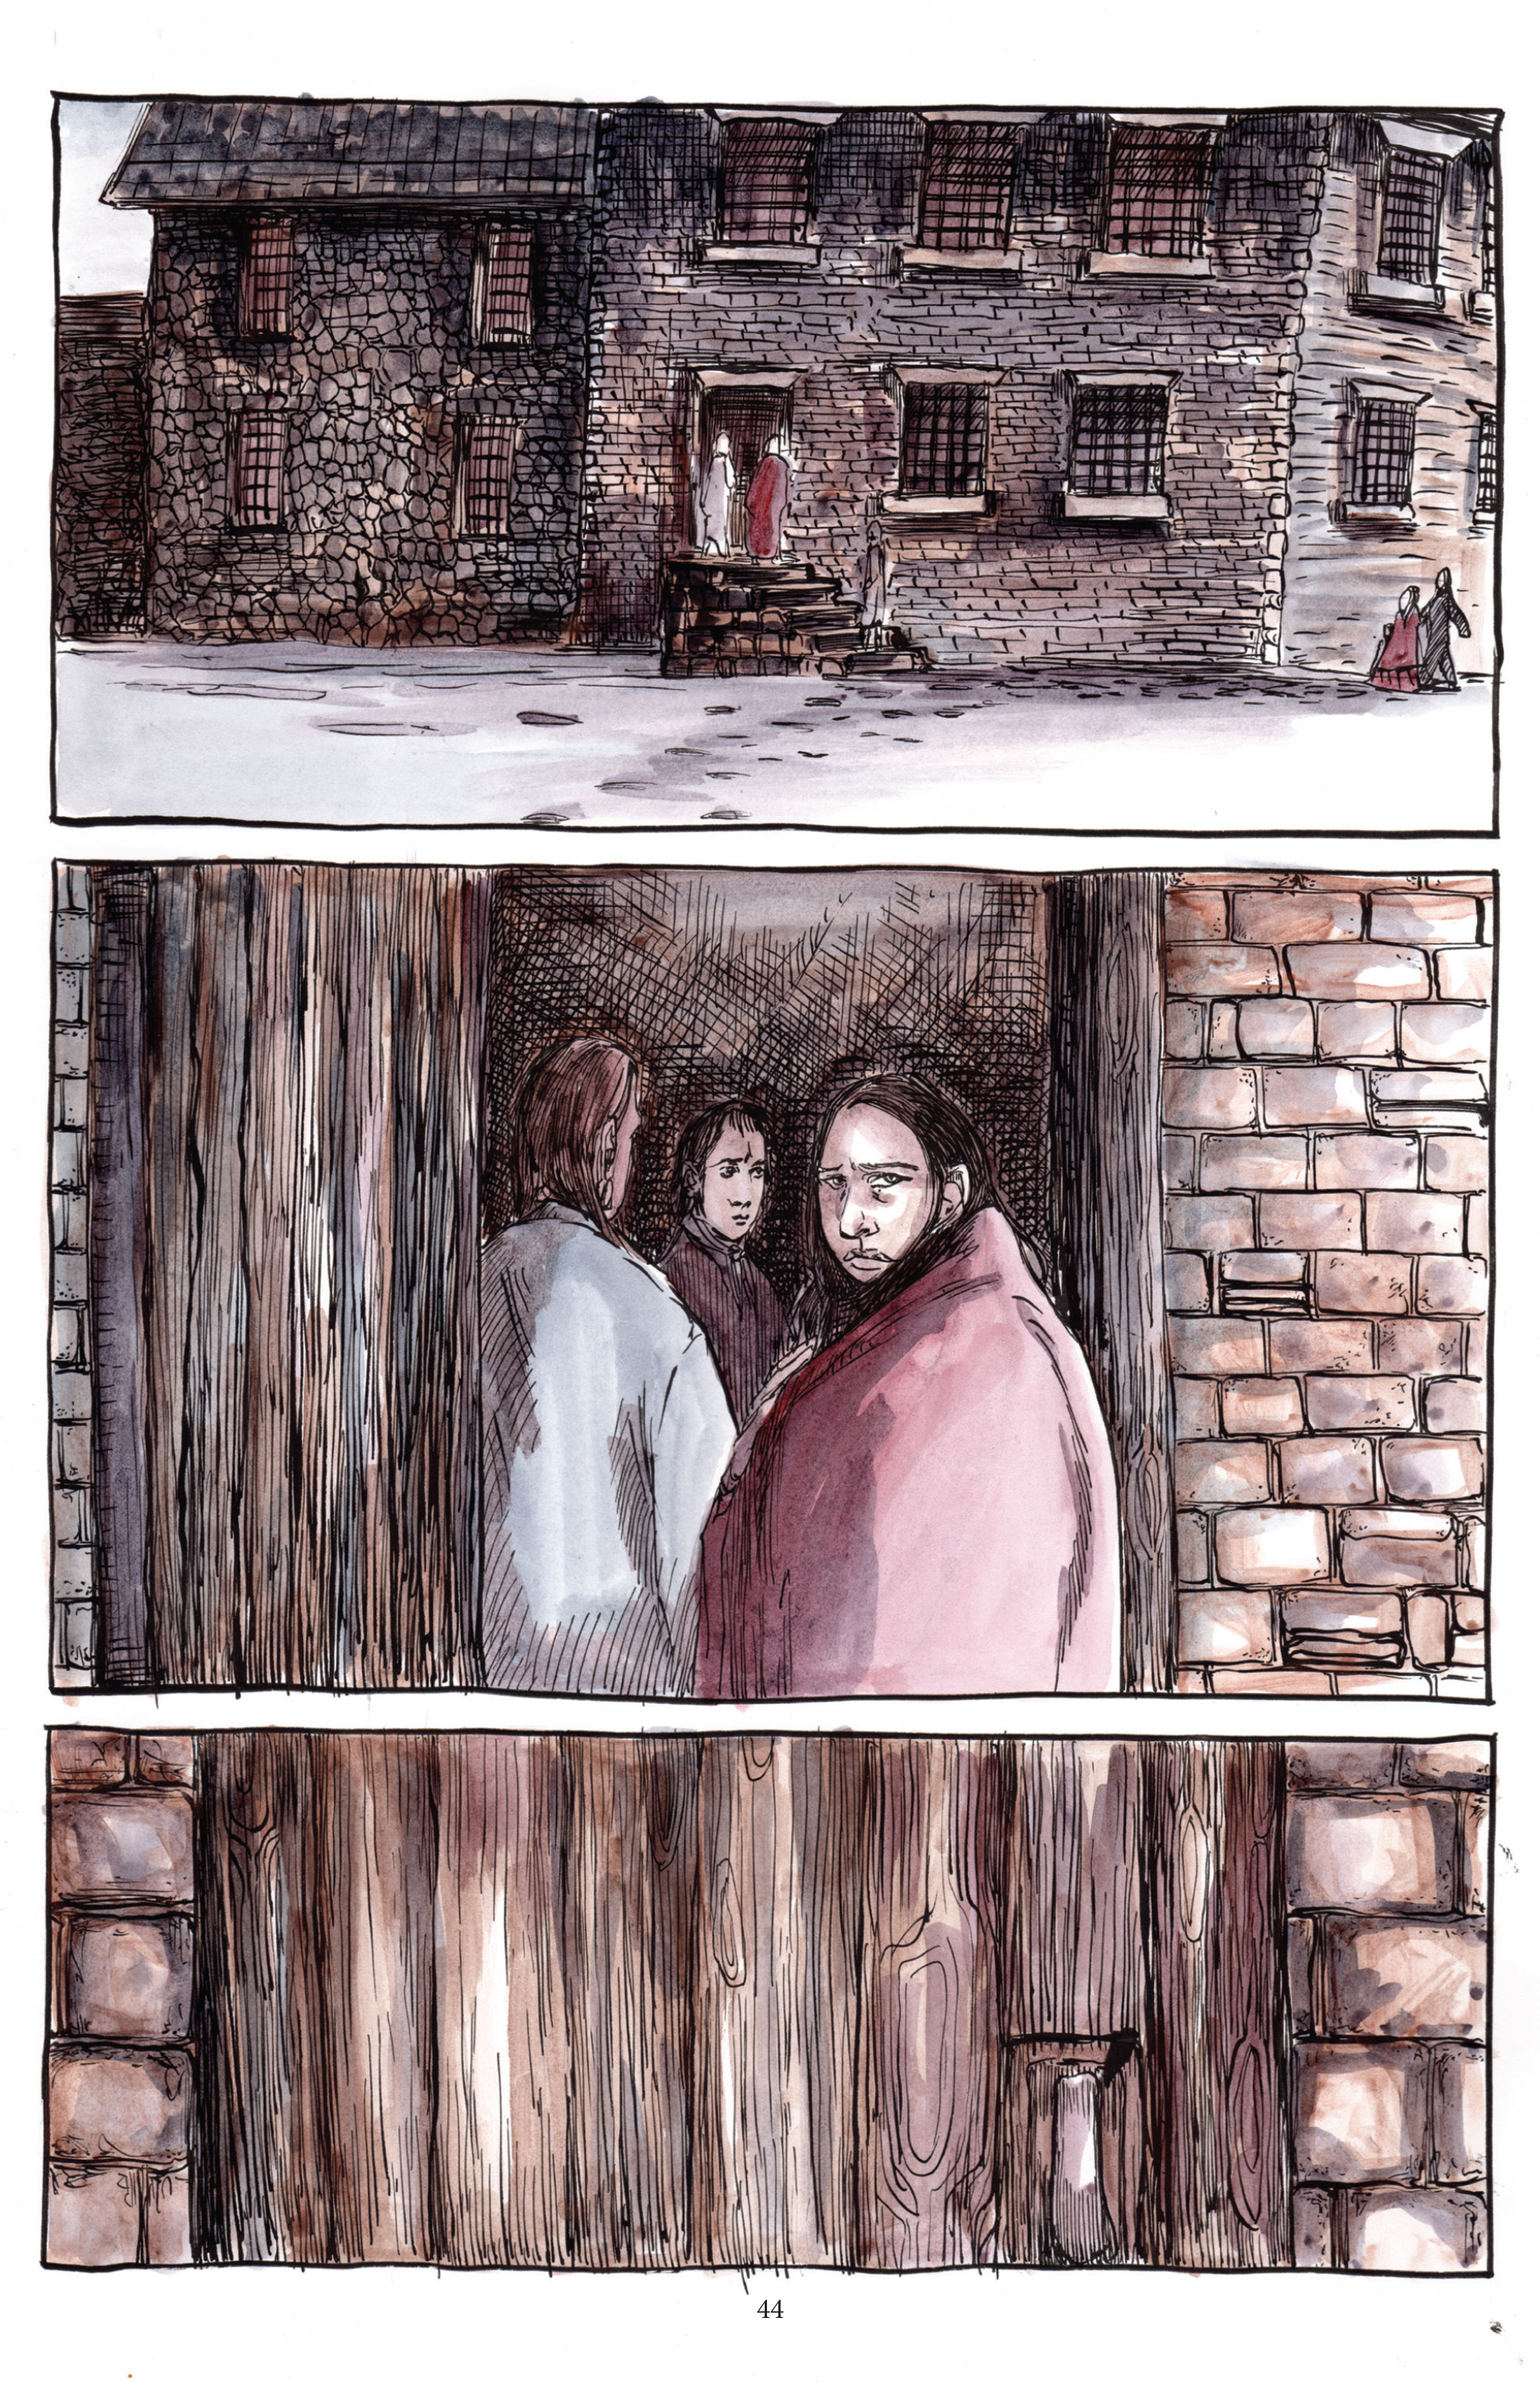 Three panels.  Panel One. The last of the group is ushered into the Workhouse.  Panel Two. From the doorway we can see their faces. Sad, frightened, this will be the last time they see the outside.  Panel Three. The door closes on them.